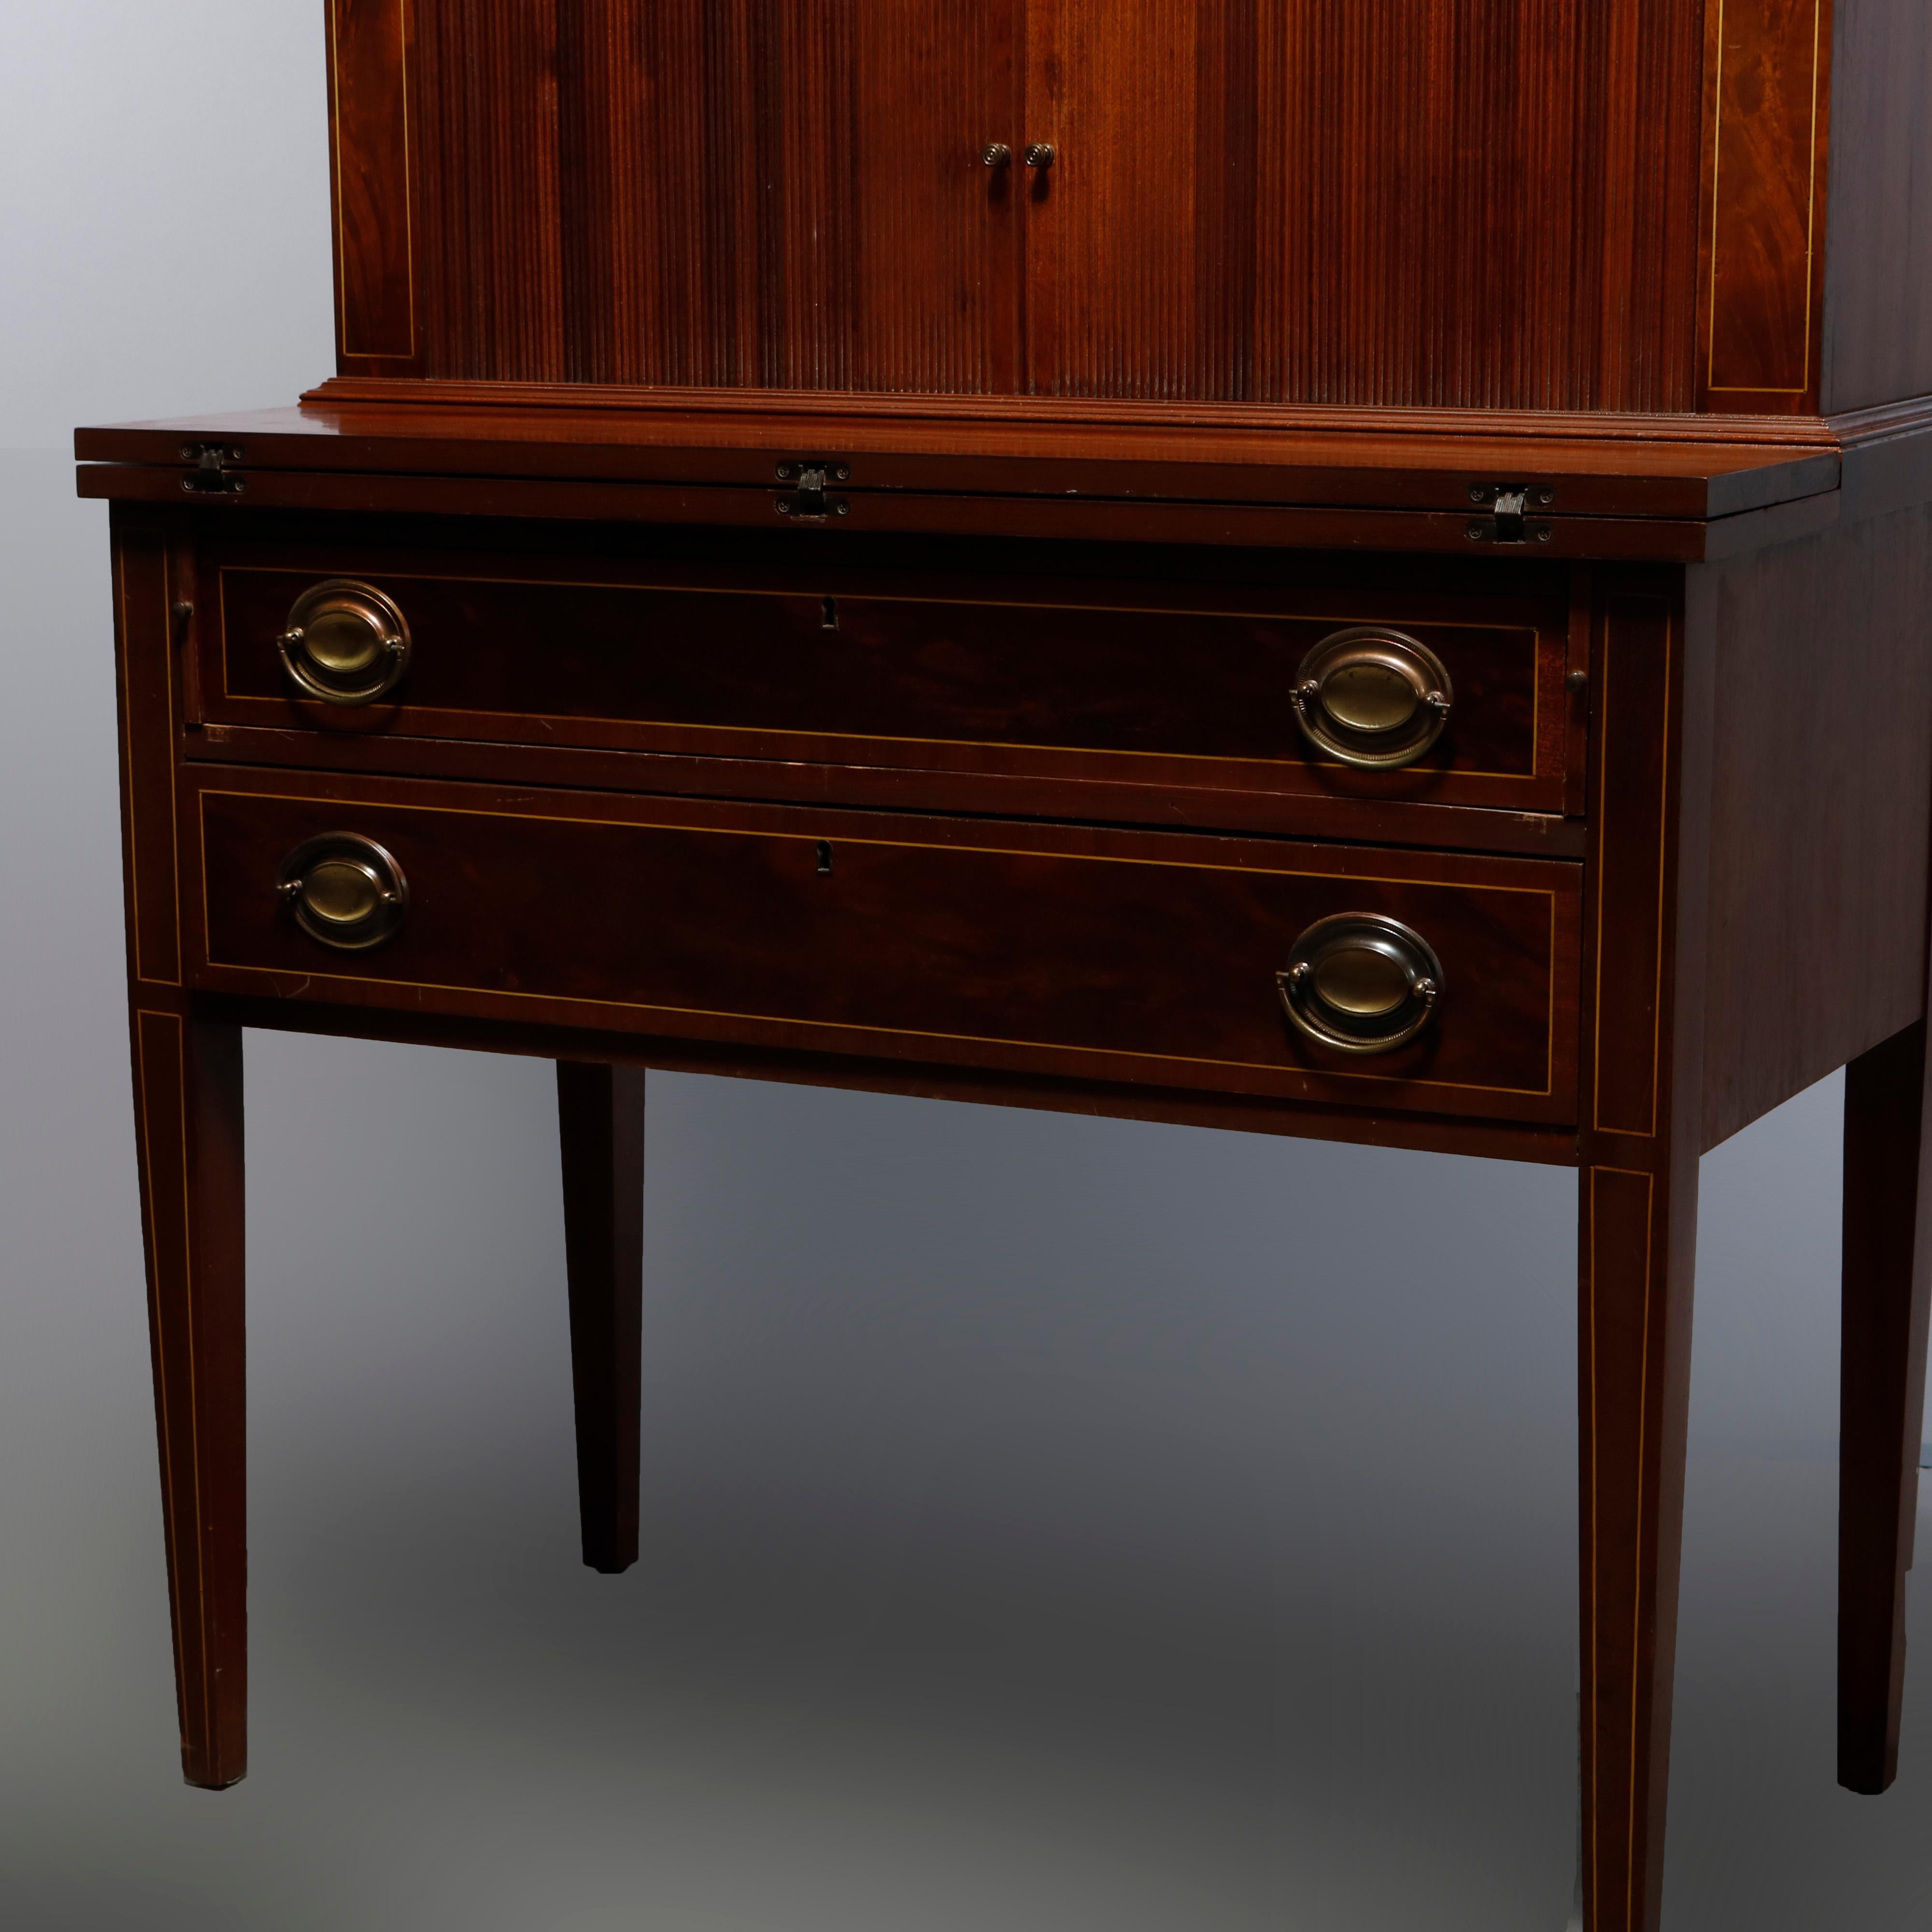 A vintage Hepplewhite style secretary by Maddox offers mahogany construction with upper bookcase having double mullioned glass doors over case with tambour doors opening to storage flanked by satinwood inlaid supports and surmounting drop front desk